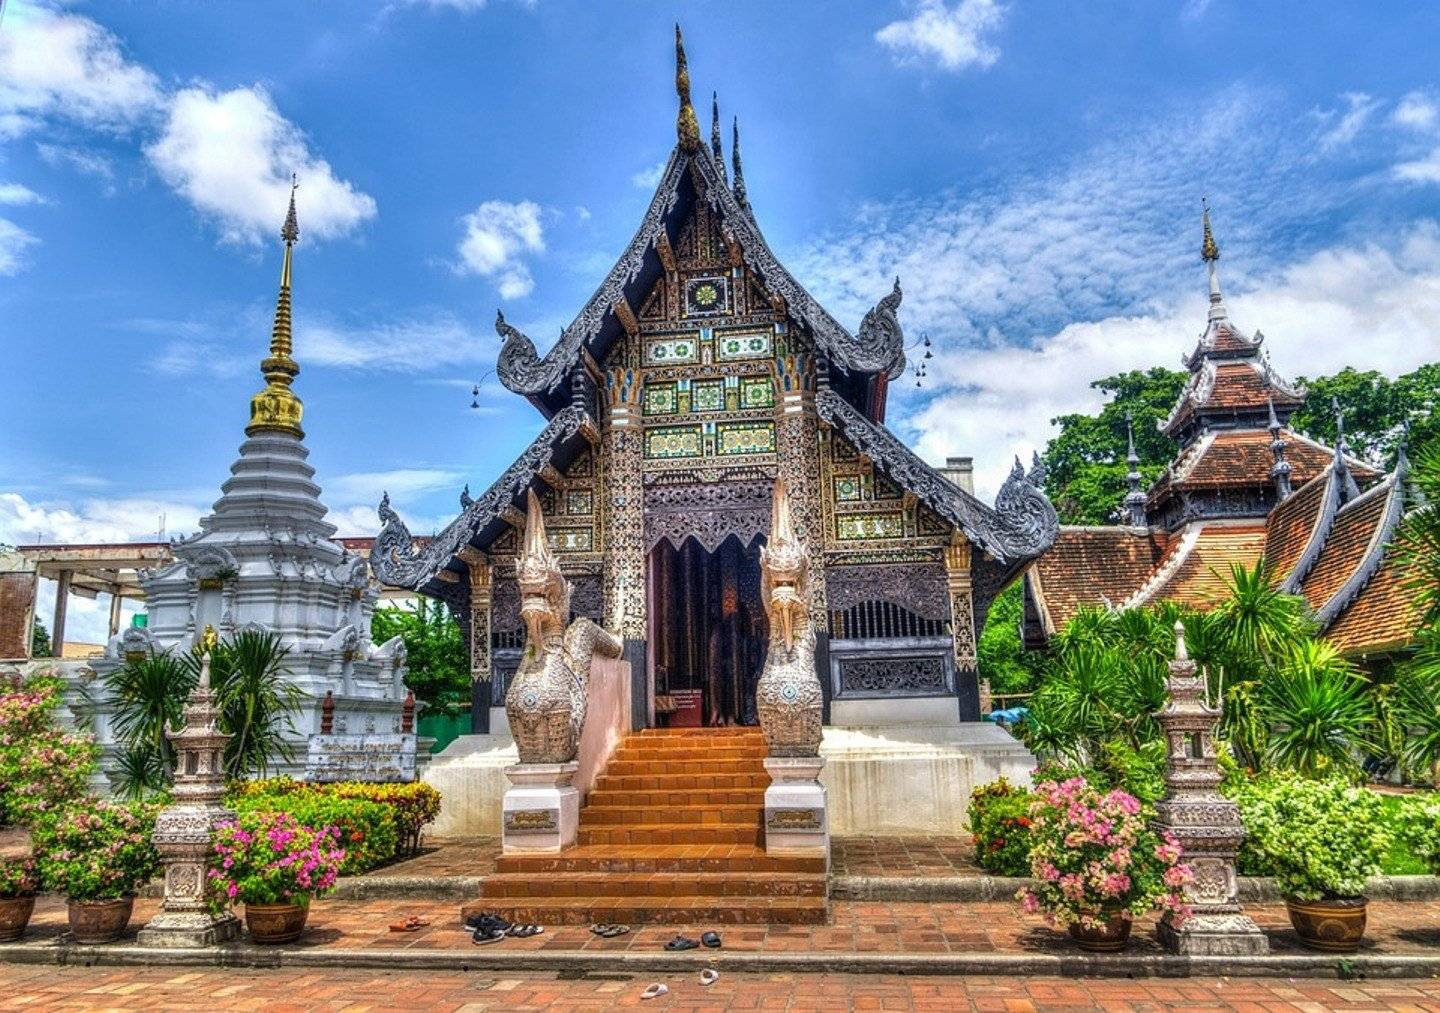 Ankunft in Chiang Mai